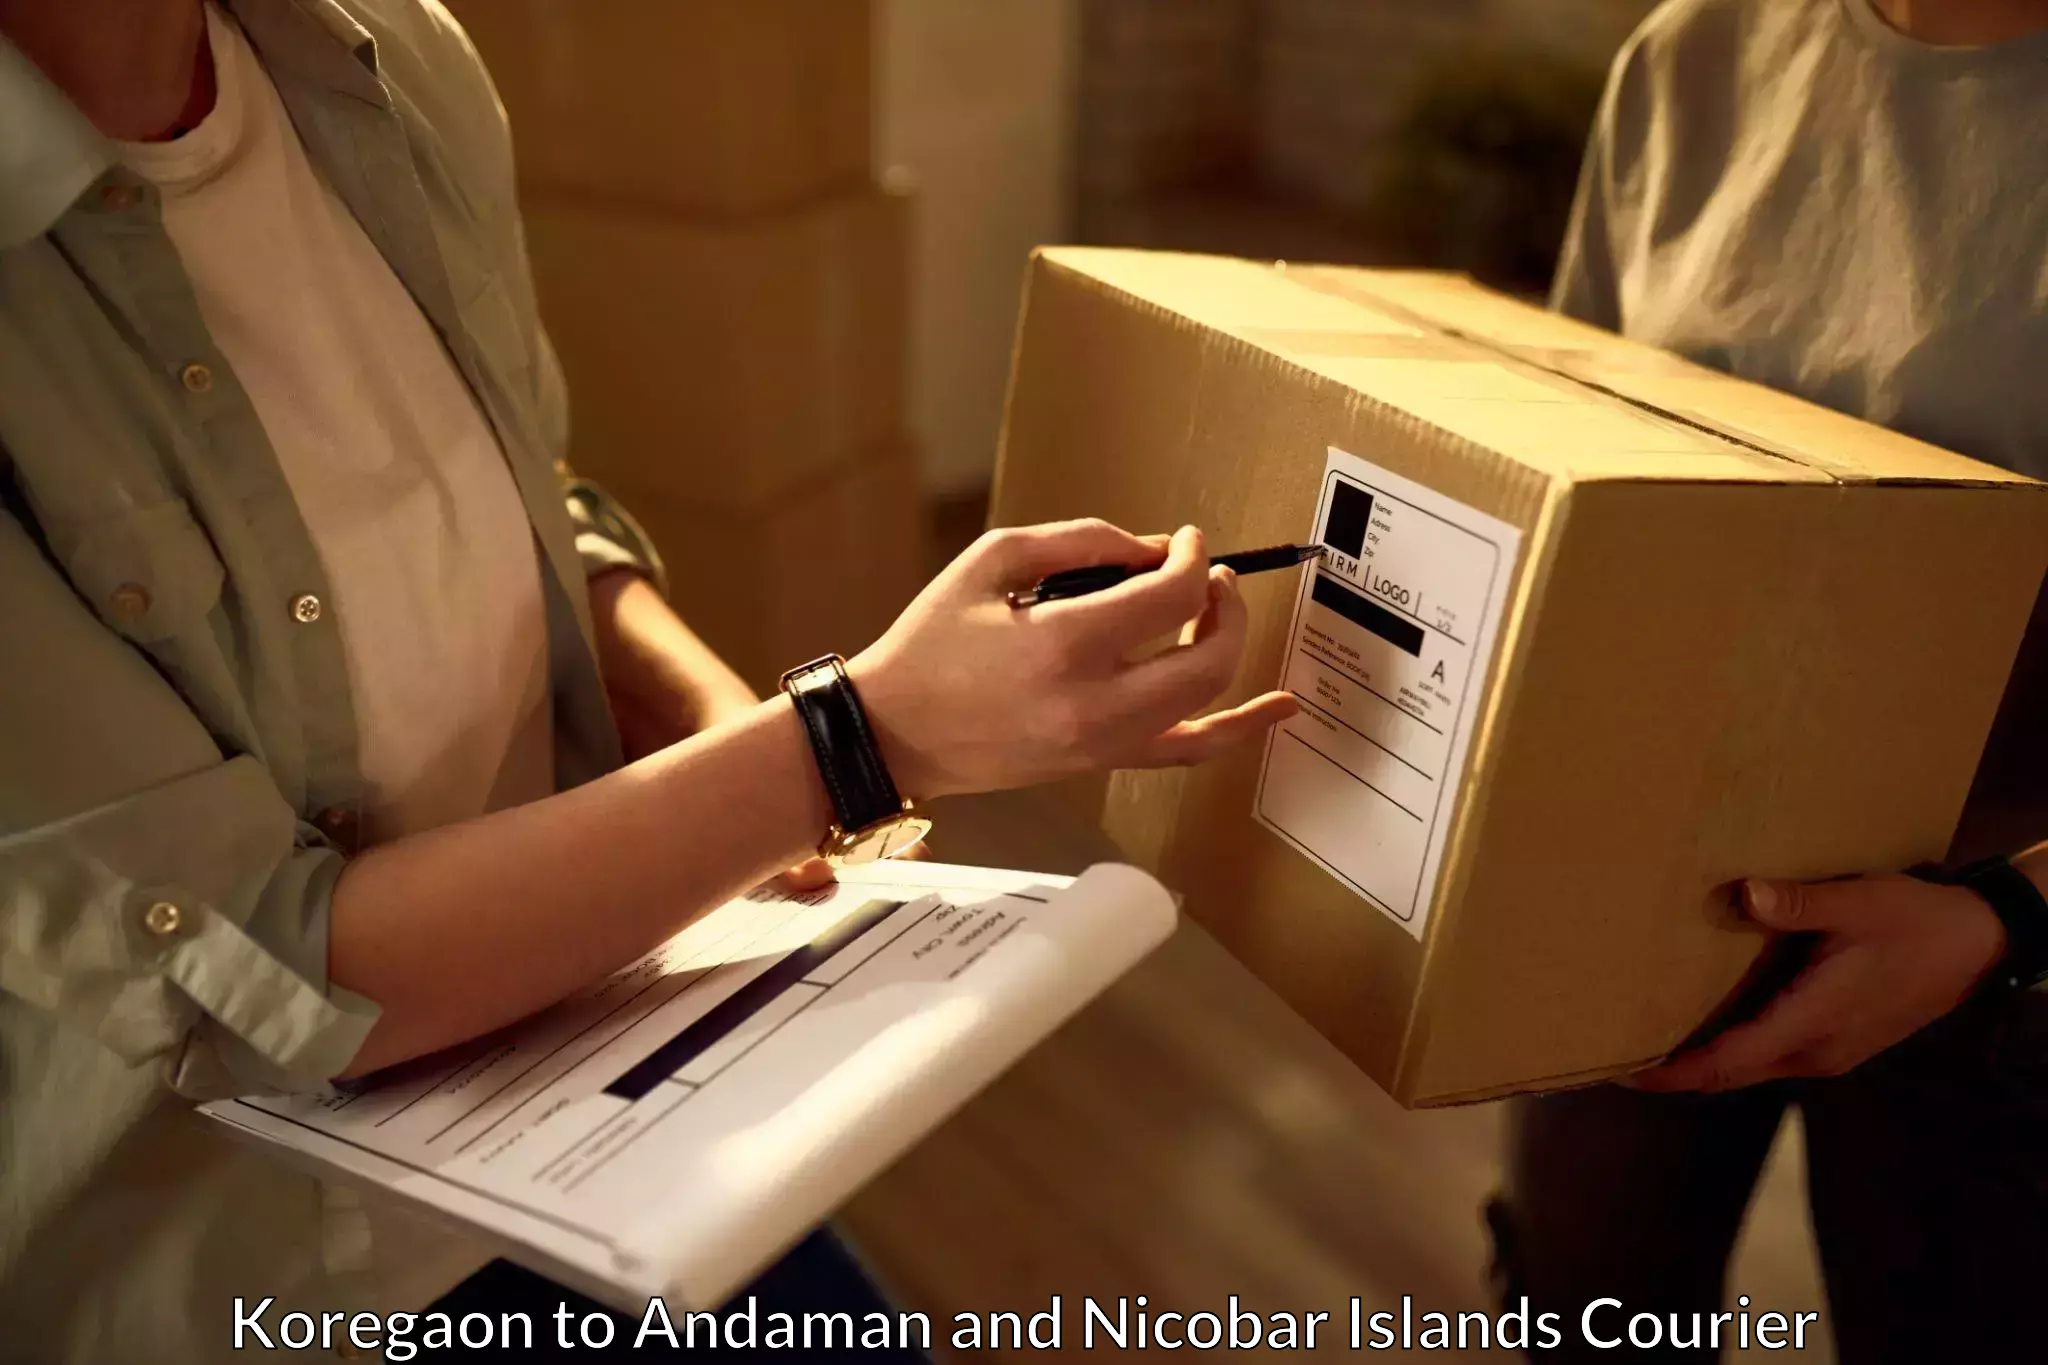 Small business couriers Koregaon to Andaman and Nicobar Islands